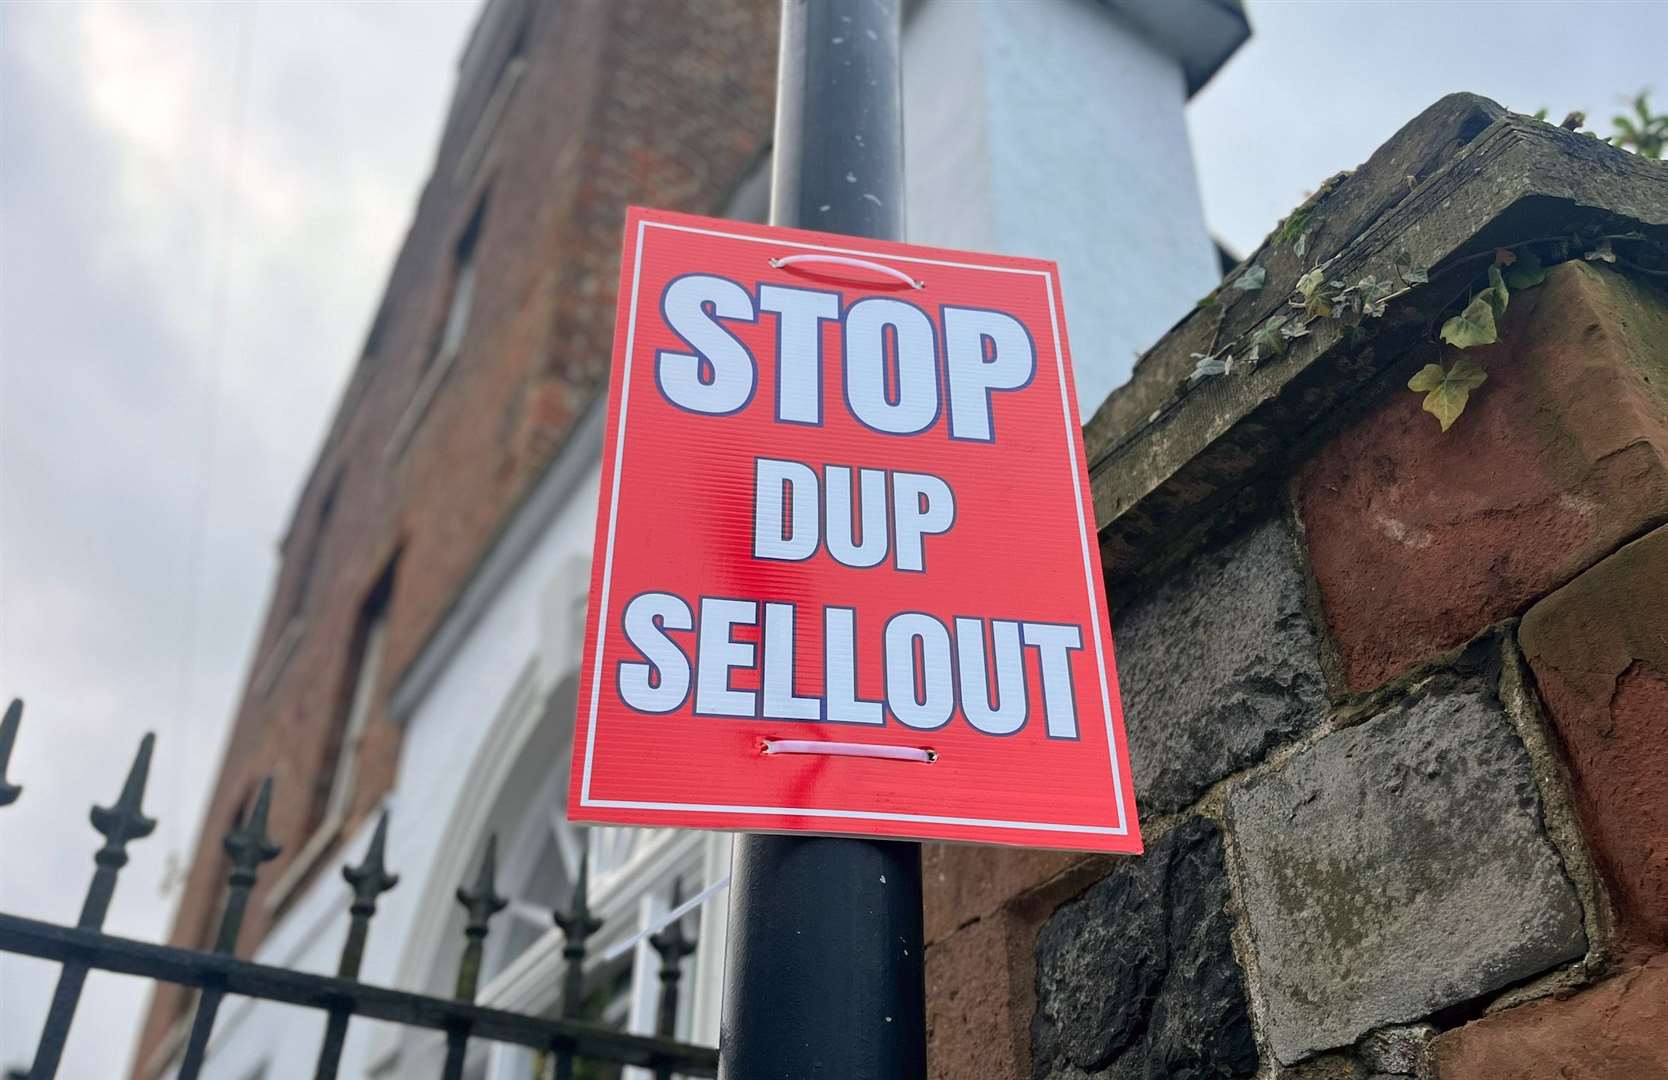 A poster stating “Stop DUP sellout” on a lamppost near Hillsborough Castle (Claudia Savage/PA)